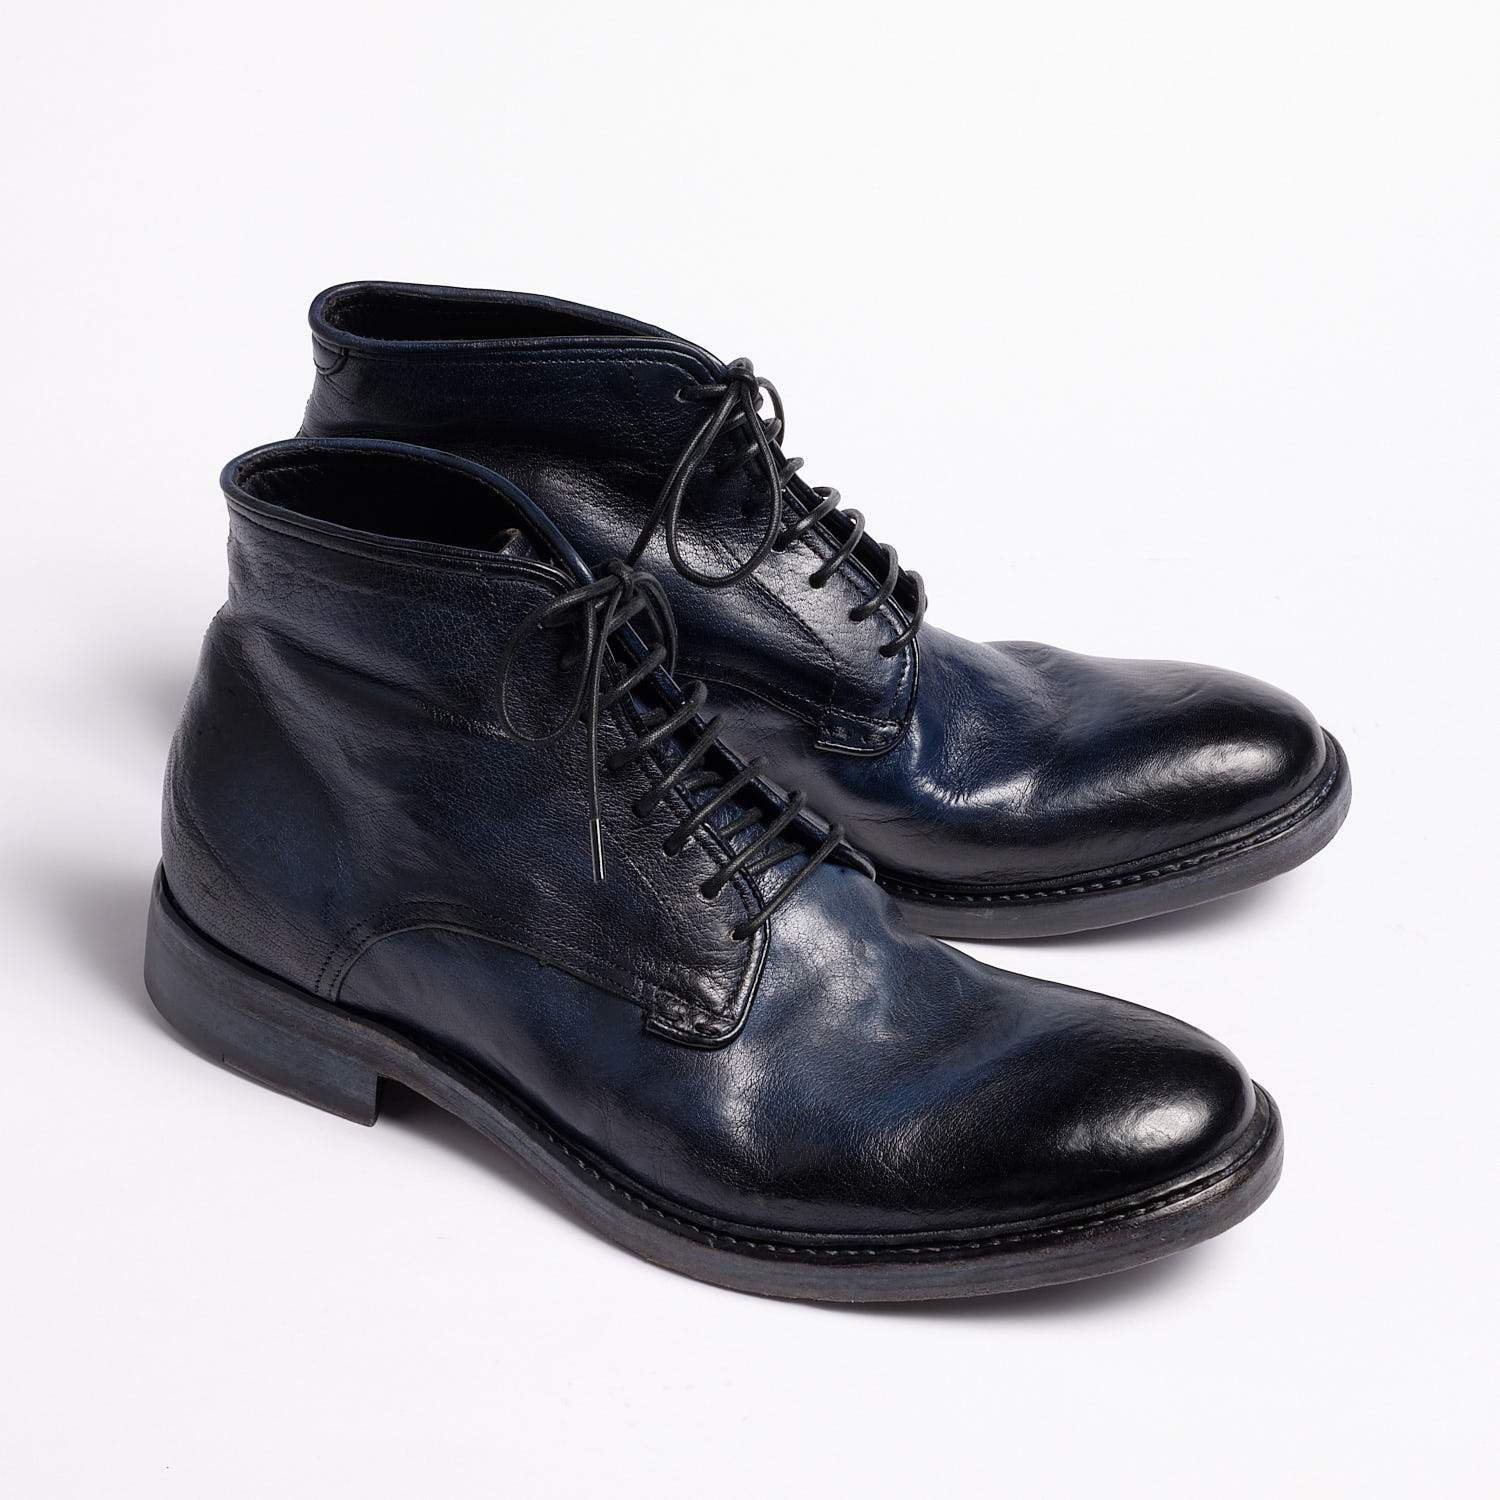 Douglas Lace Mid Shoes Natural Buffalo leather navy